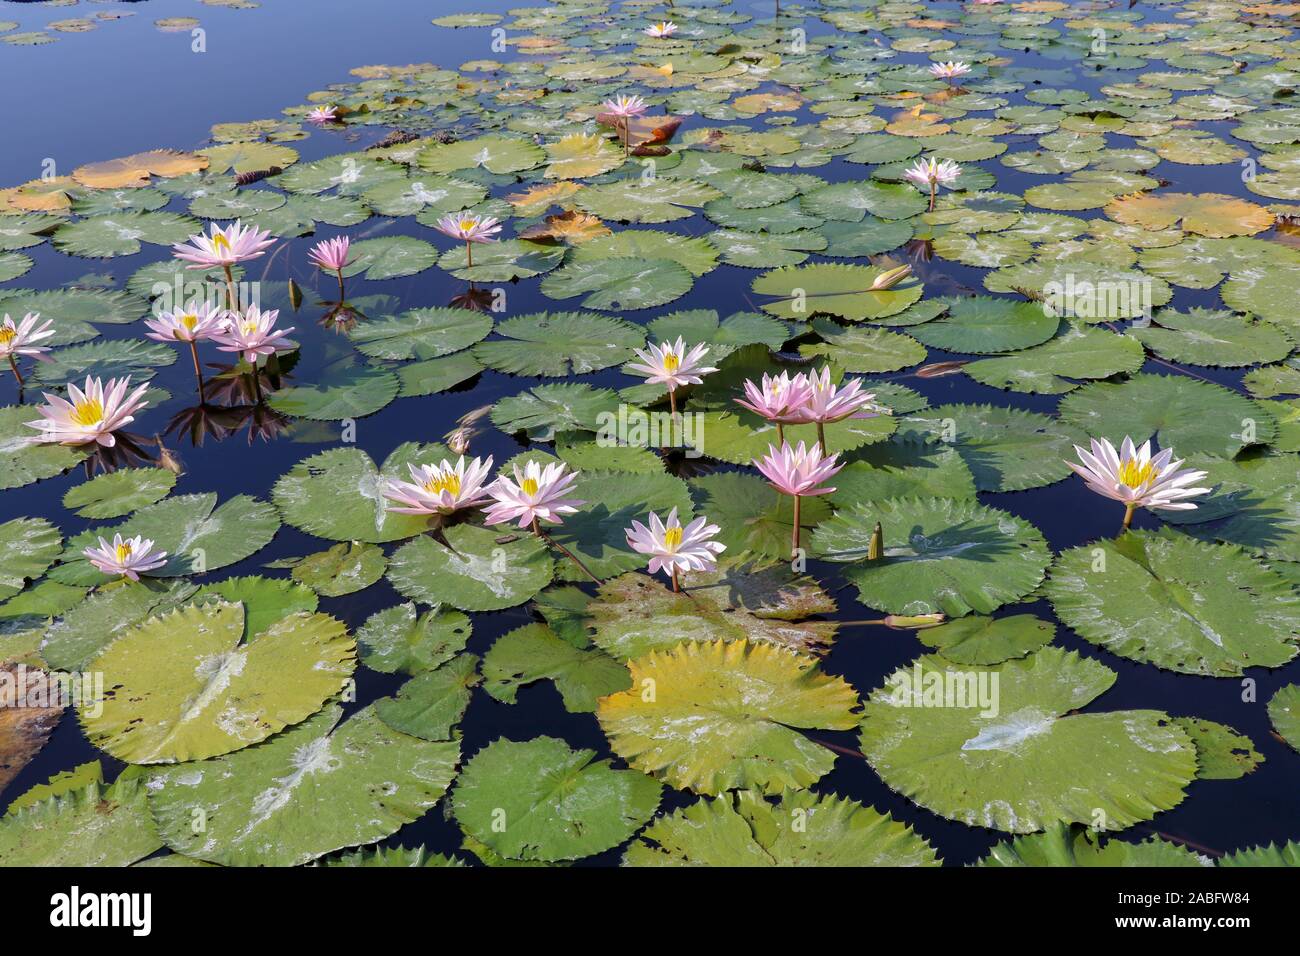 Water area planted with aquatic plants. In the morning sun blooms a number of white water lilies on the surface of the pond. Nymphaea alba. Stock Photo